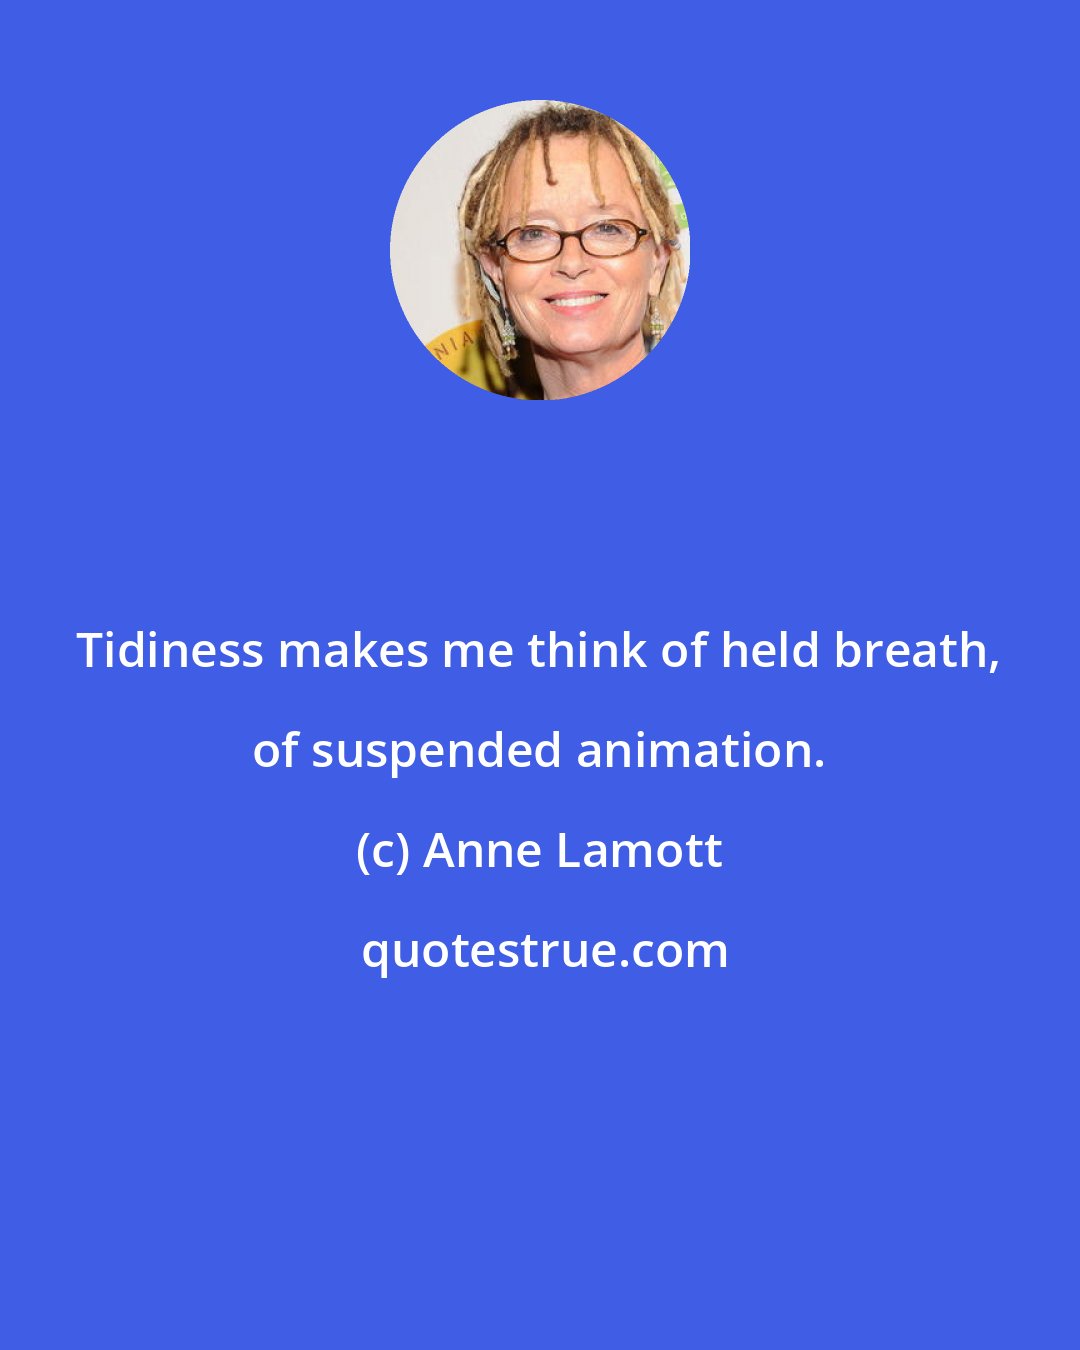 Anne Lamott: Tidiness makes me think of held breath, of suspended animation.